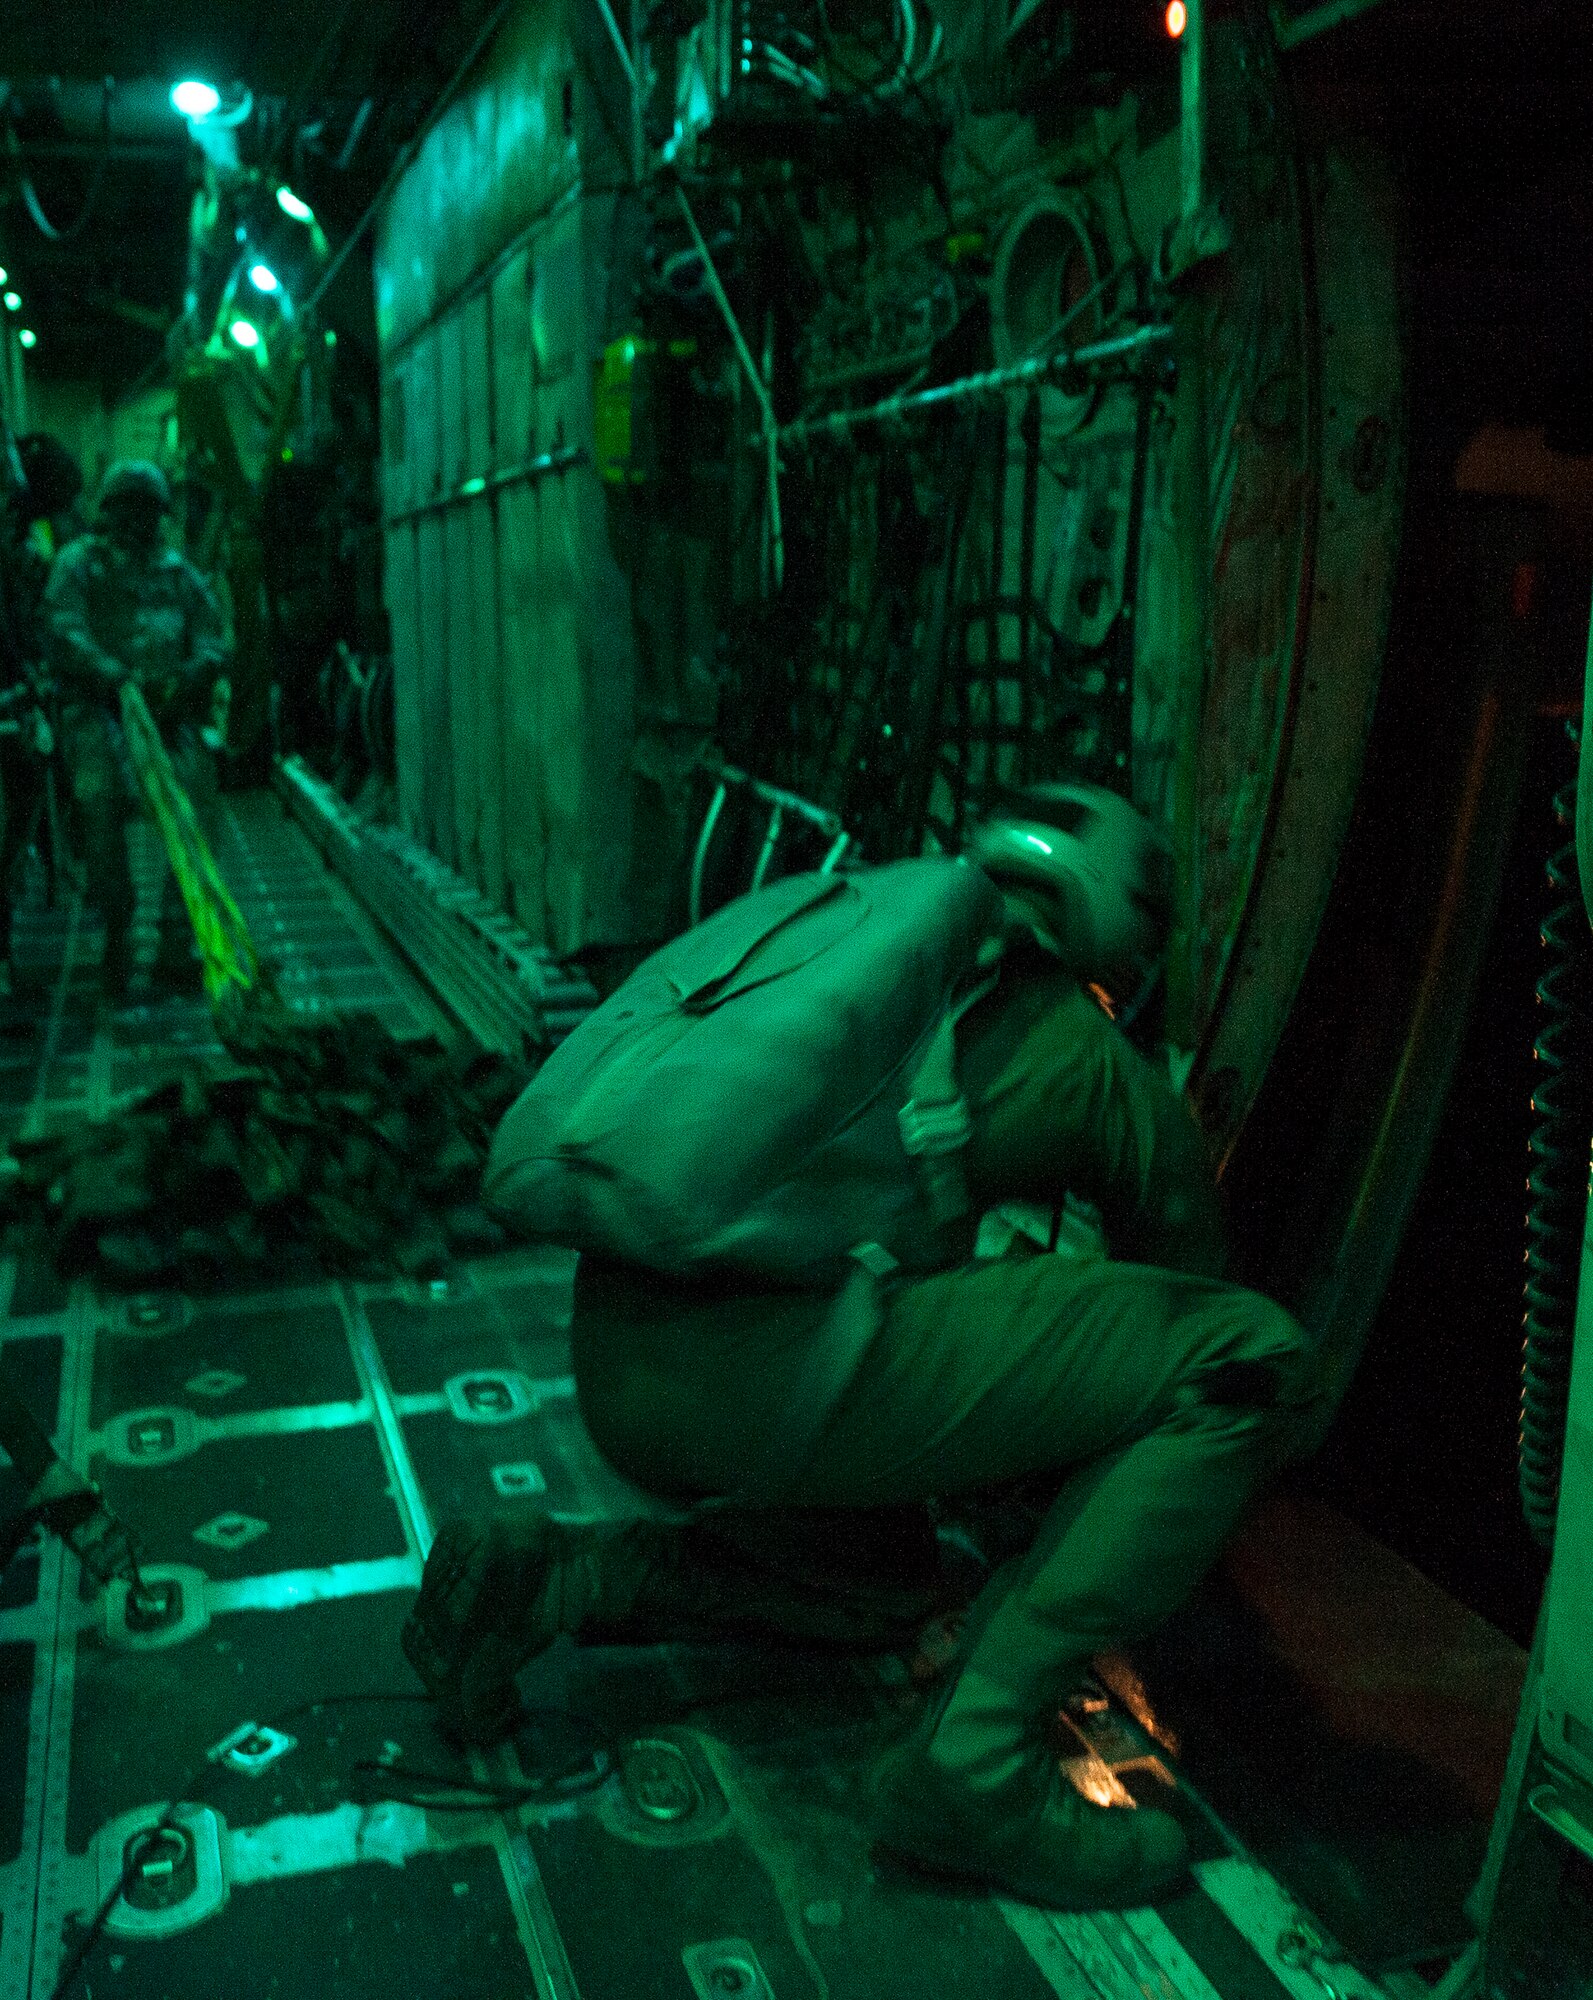 U.S Air Force Senior Airman Justin Lyles secures the aft paratroop doors of a C-130H after a personnel drop Aug. 18, 2013, near Alexandria International Airport, La. There were 681 paratroopers dropped from nine U.S. Air Force aircraft in support of Joint Operational Access Exercise 13-0X. (U.S. Air Force photo by Staff Sgt. Russ Scalf)